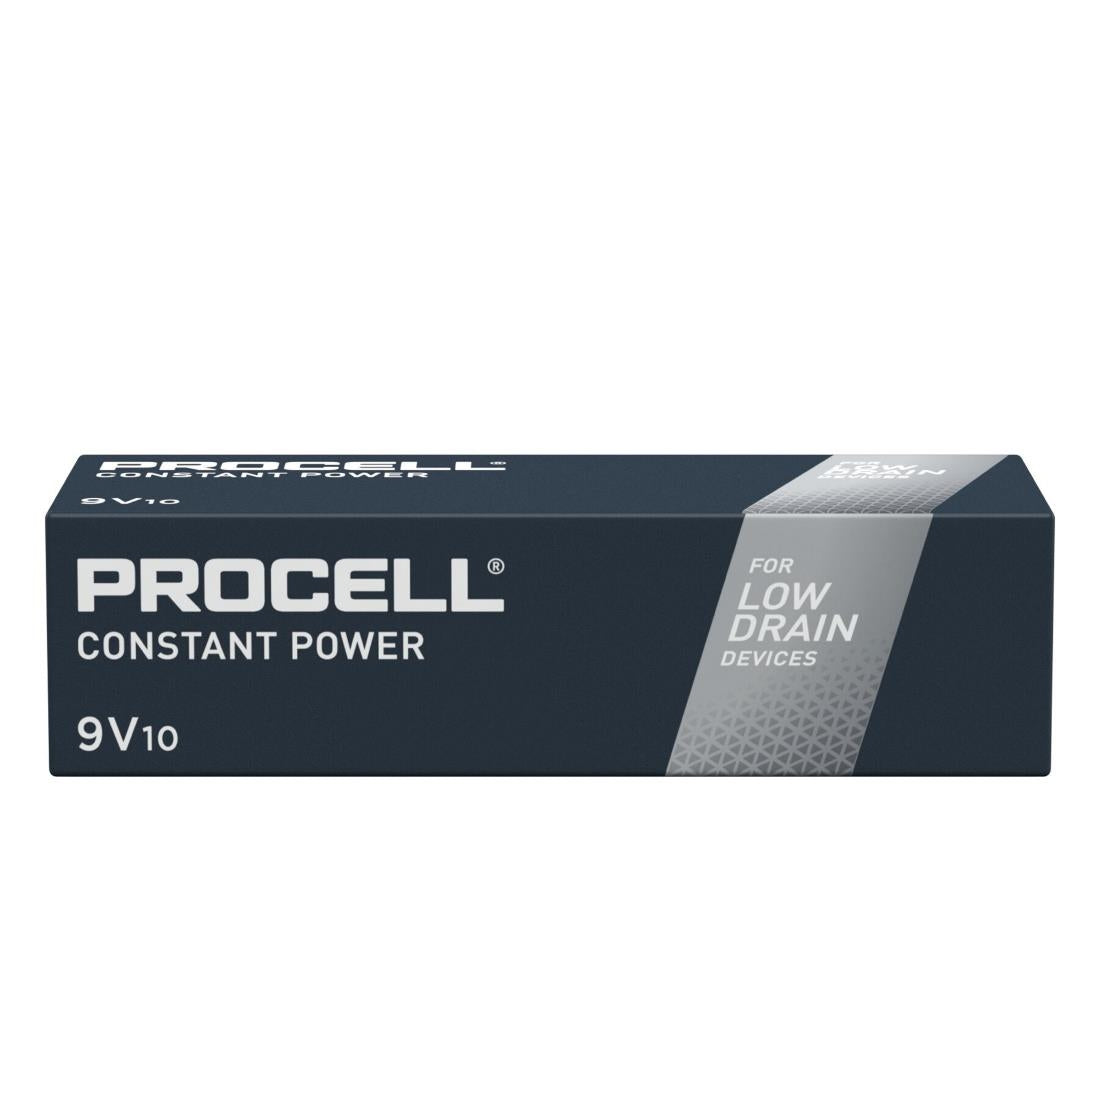 CU754 Duracell Procell Constant Power 9V Battery (Pack of 10) JD Catering Equipment Solutions Ltd